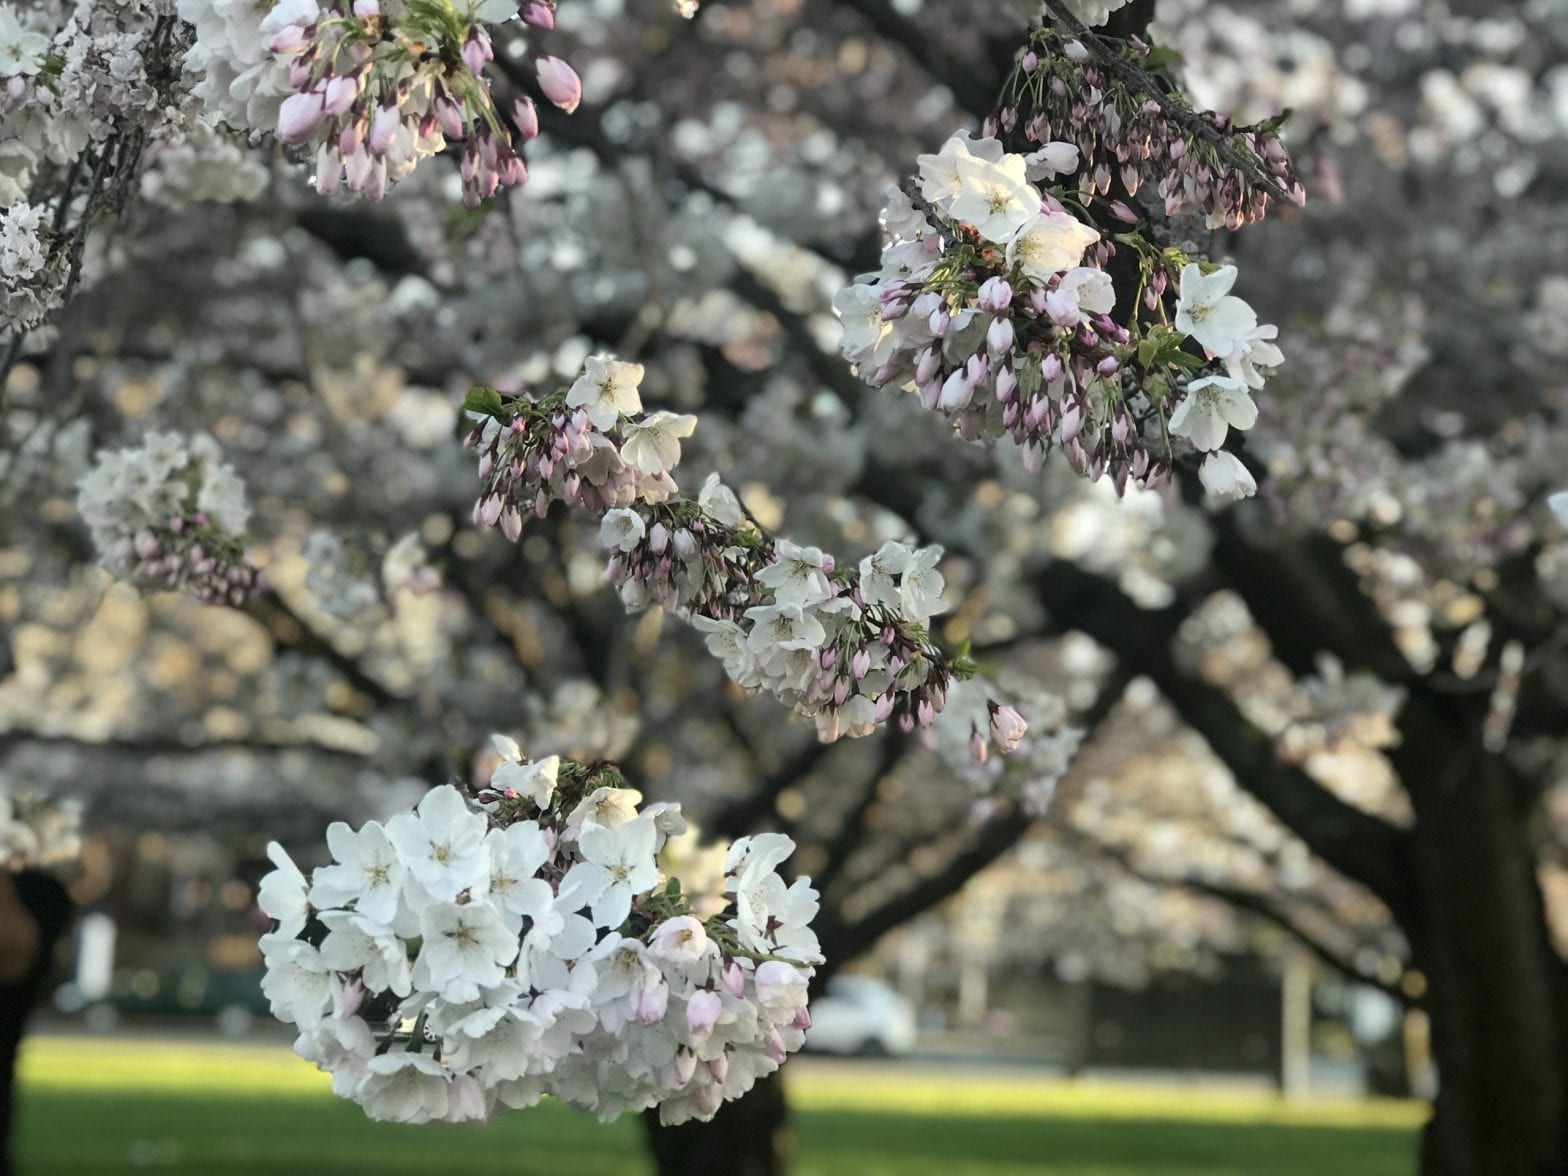 Thanksgiving - Springtime blossoms in Victoria, BC